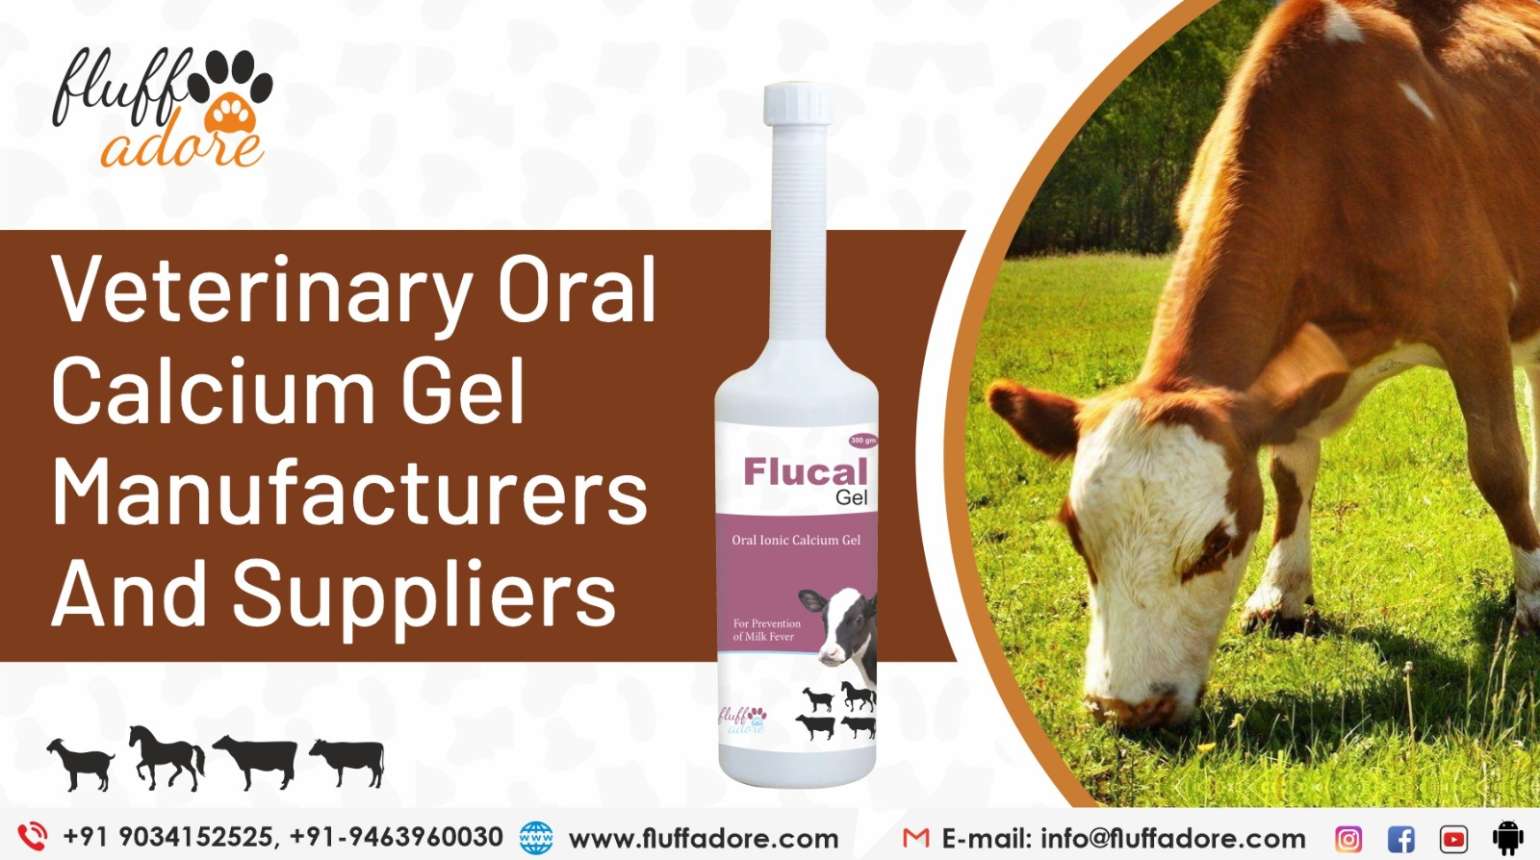 Veterinary Oral Calcium Gel Manufacturers and suppliers